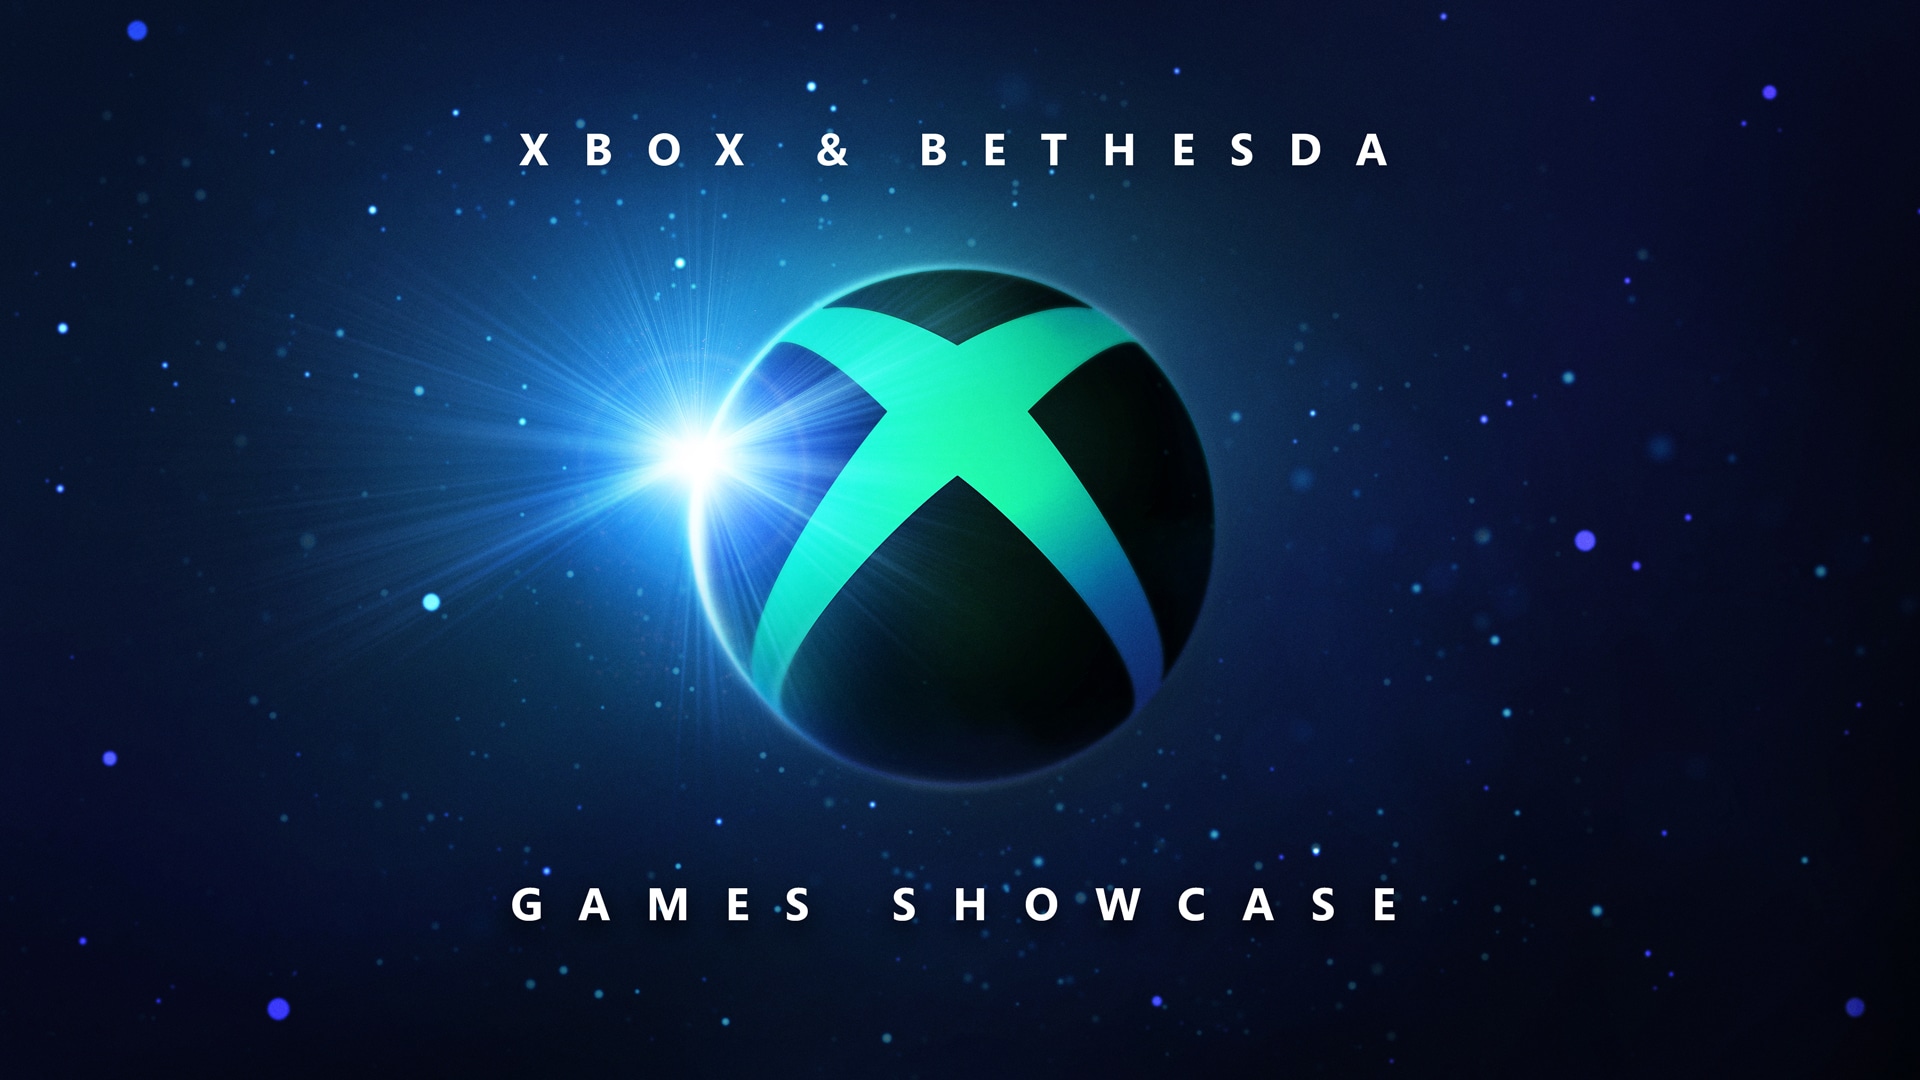 Watch the Xbox & Bethesda Showcase - News today from 7 p.m